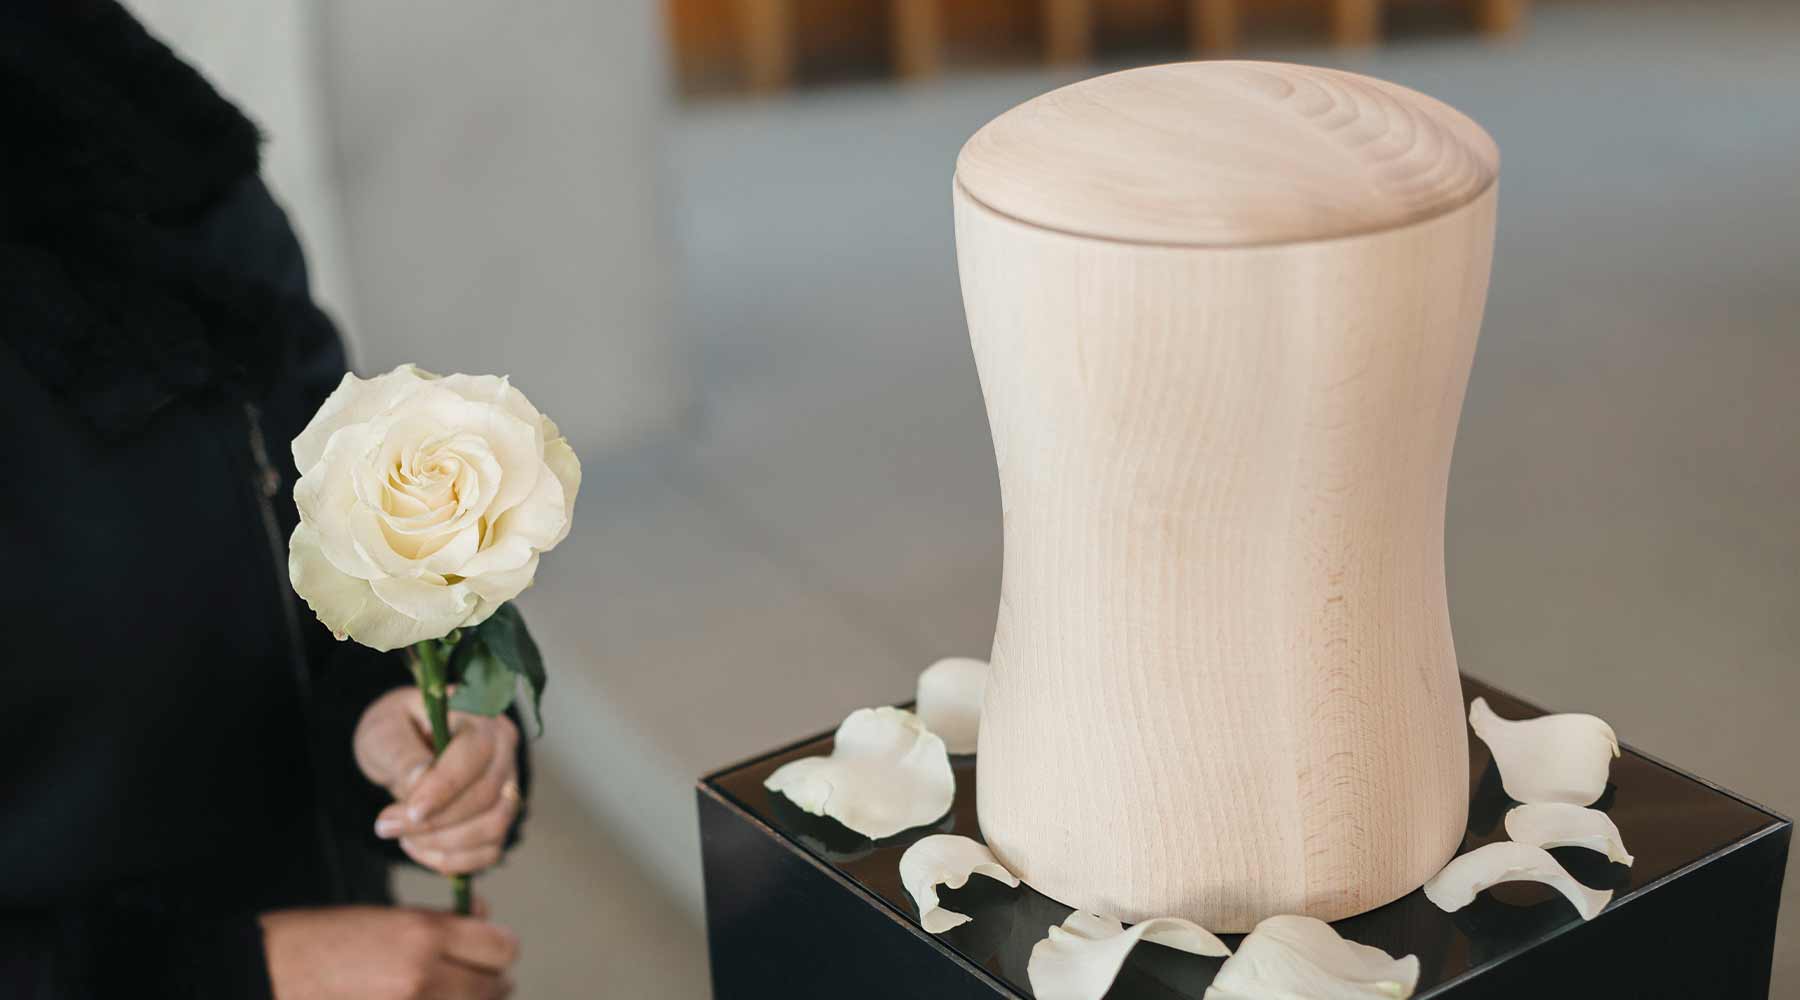 What Materials Are Used in Cremation Urns?